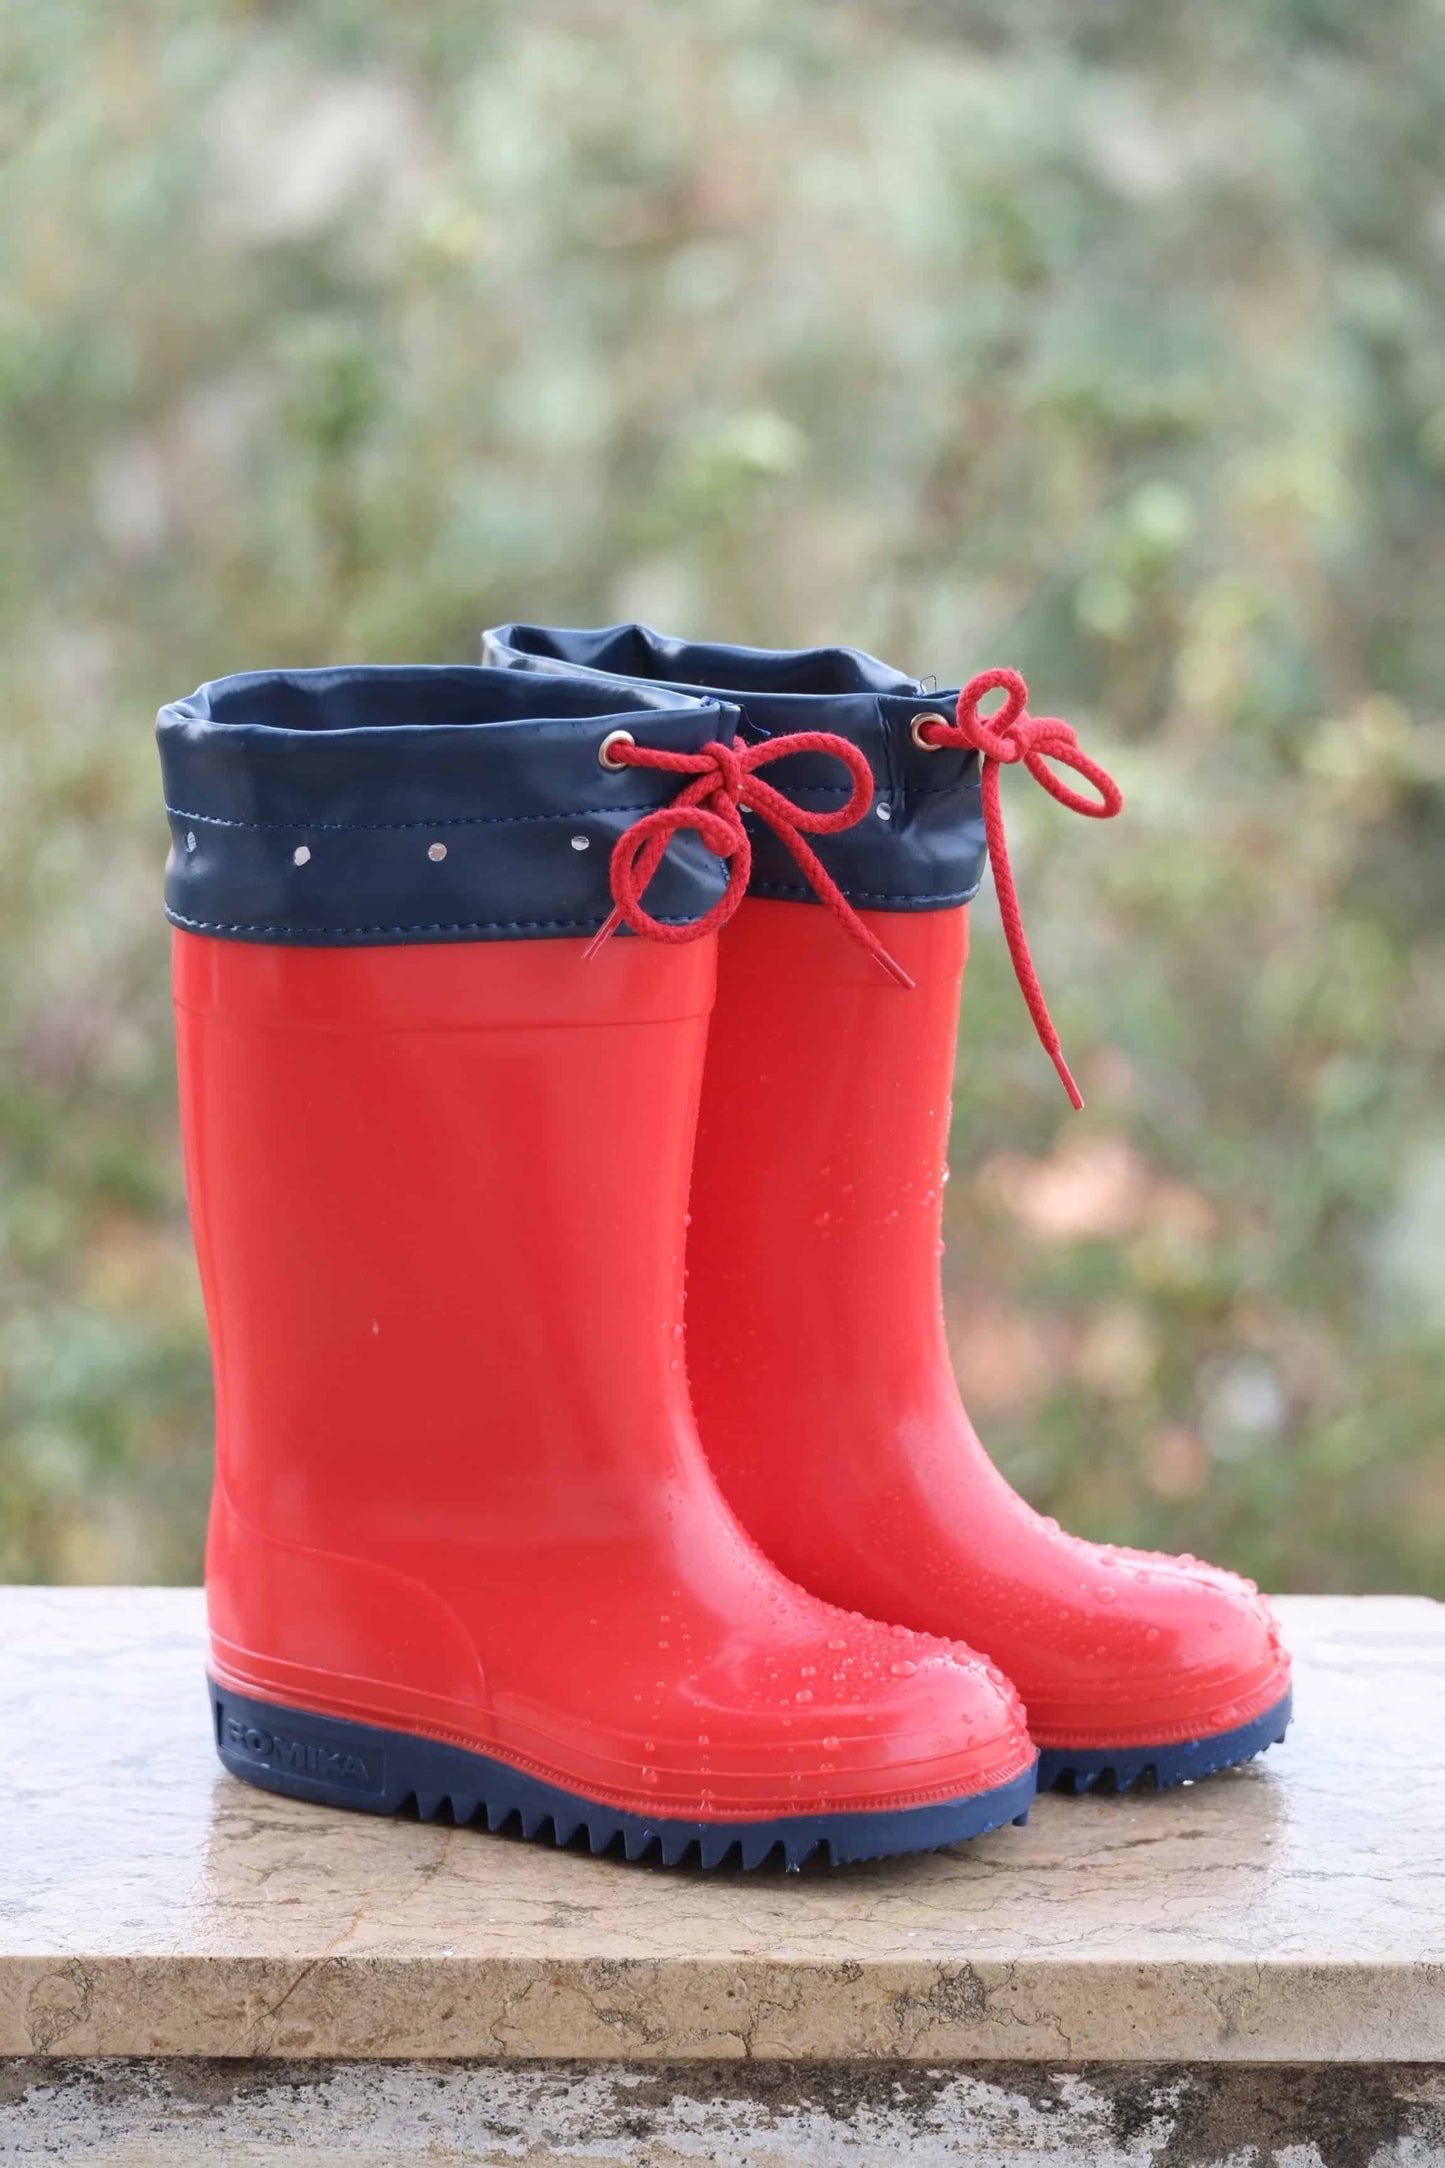 Red and navy ROMIKA Bobby Rain Boots on a ledge with raindrops on the boots